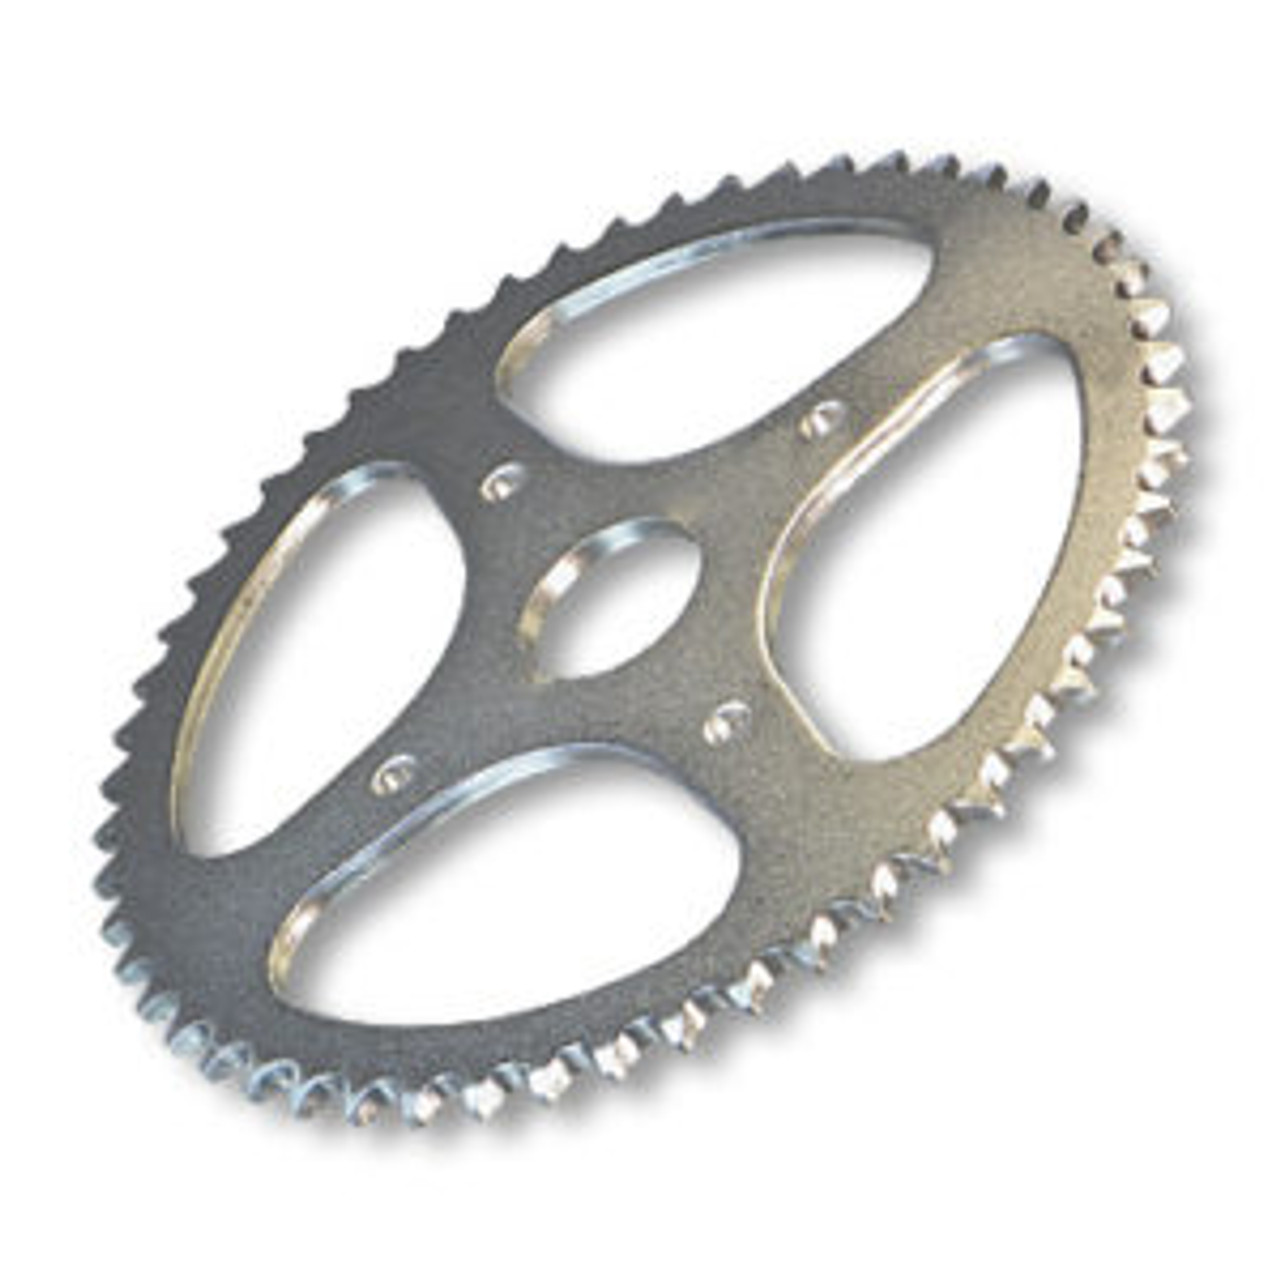 Steel Sprocket #35 Chain , 60 Tooth , 4" Bolt Circle , 4 Holes@.3125", 1-1/2" Bore, P2286 Bolt Pattern